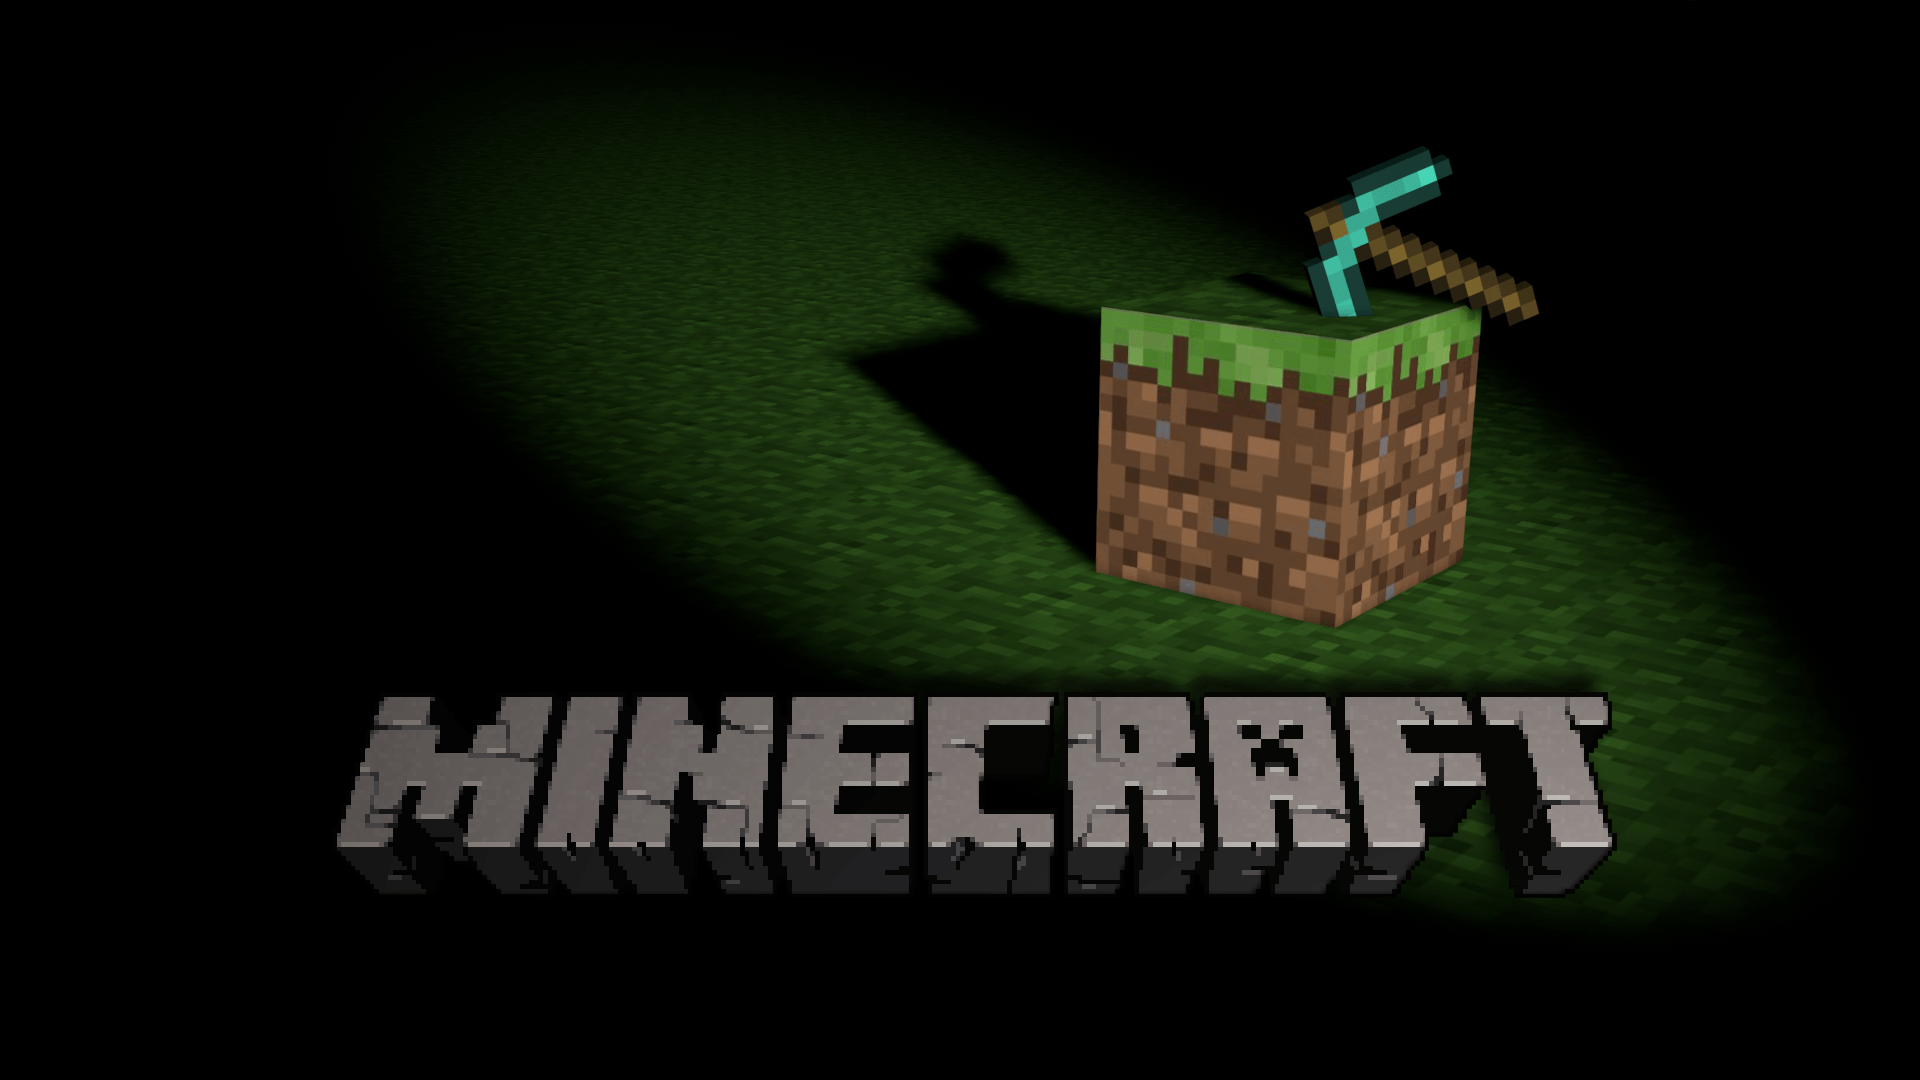 Cool Minecraft Background For Your Phone GB & Esports News & Blog